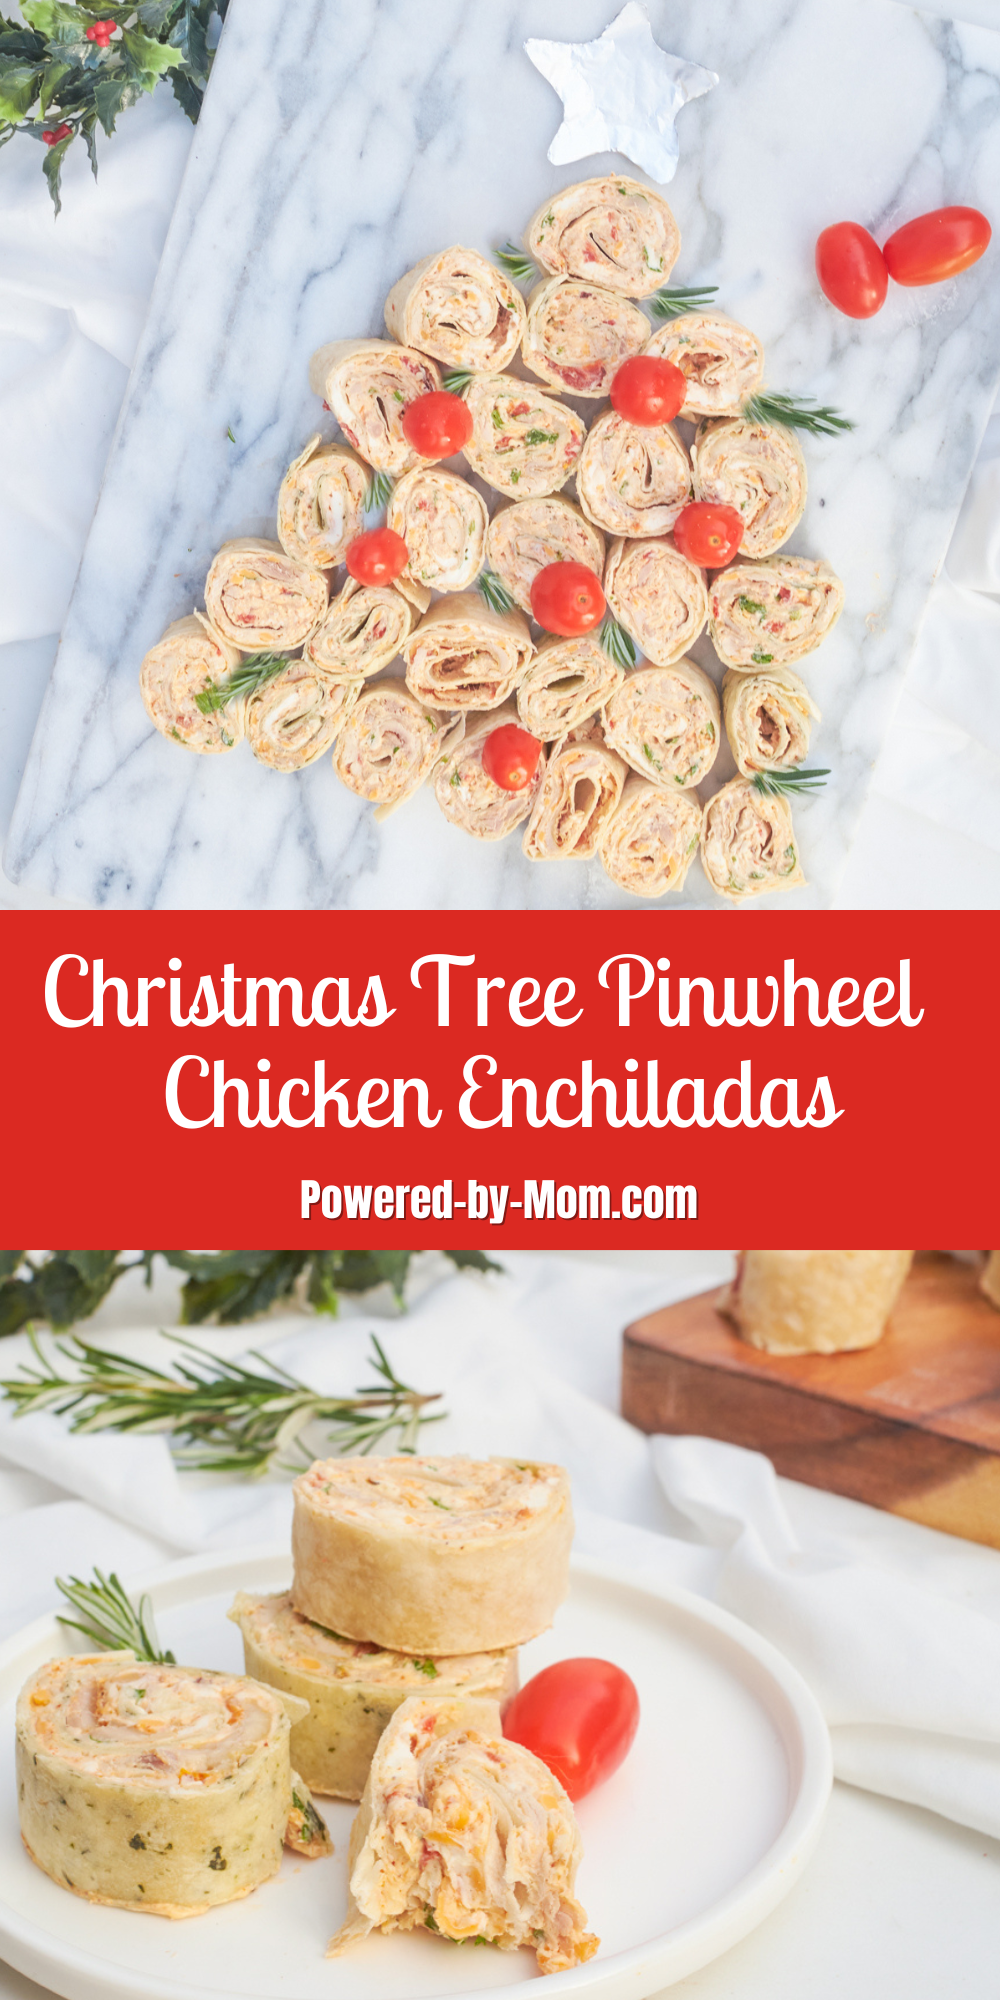 Christmas Tree Pinwheel Appetizer: Tortilla chicken enchilada pinwheels are soft tortilla wraps filled with a delicious and savoury cream cheese filling that are shaped into a Christmas tree. This no-bake appetizer is easy to put together and is perfect for any holiday gathering.